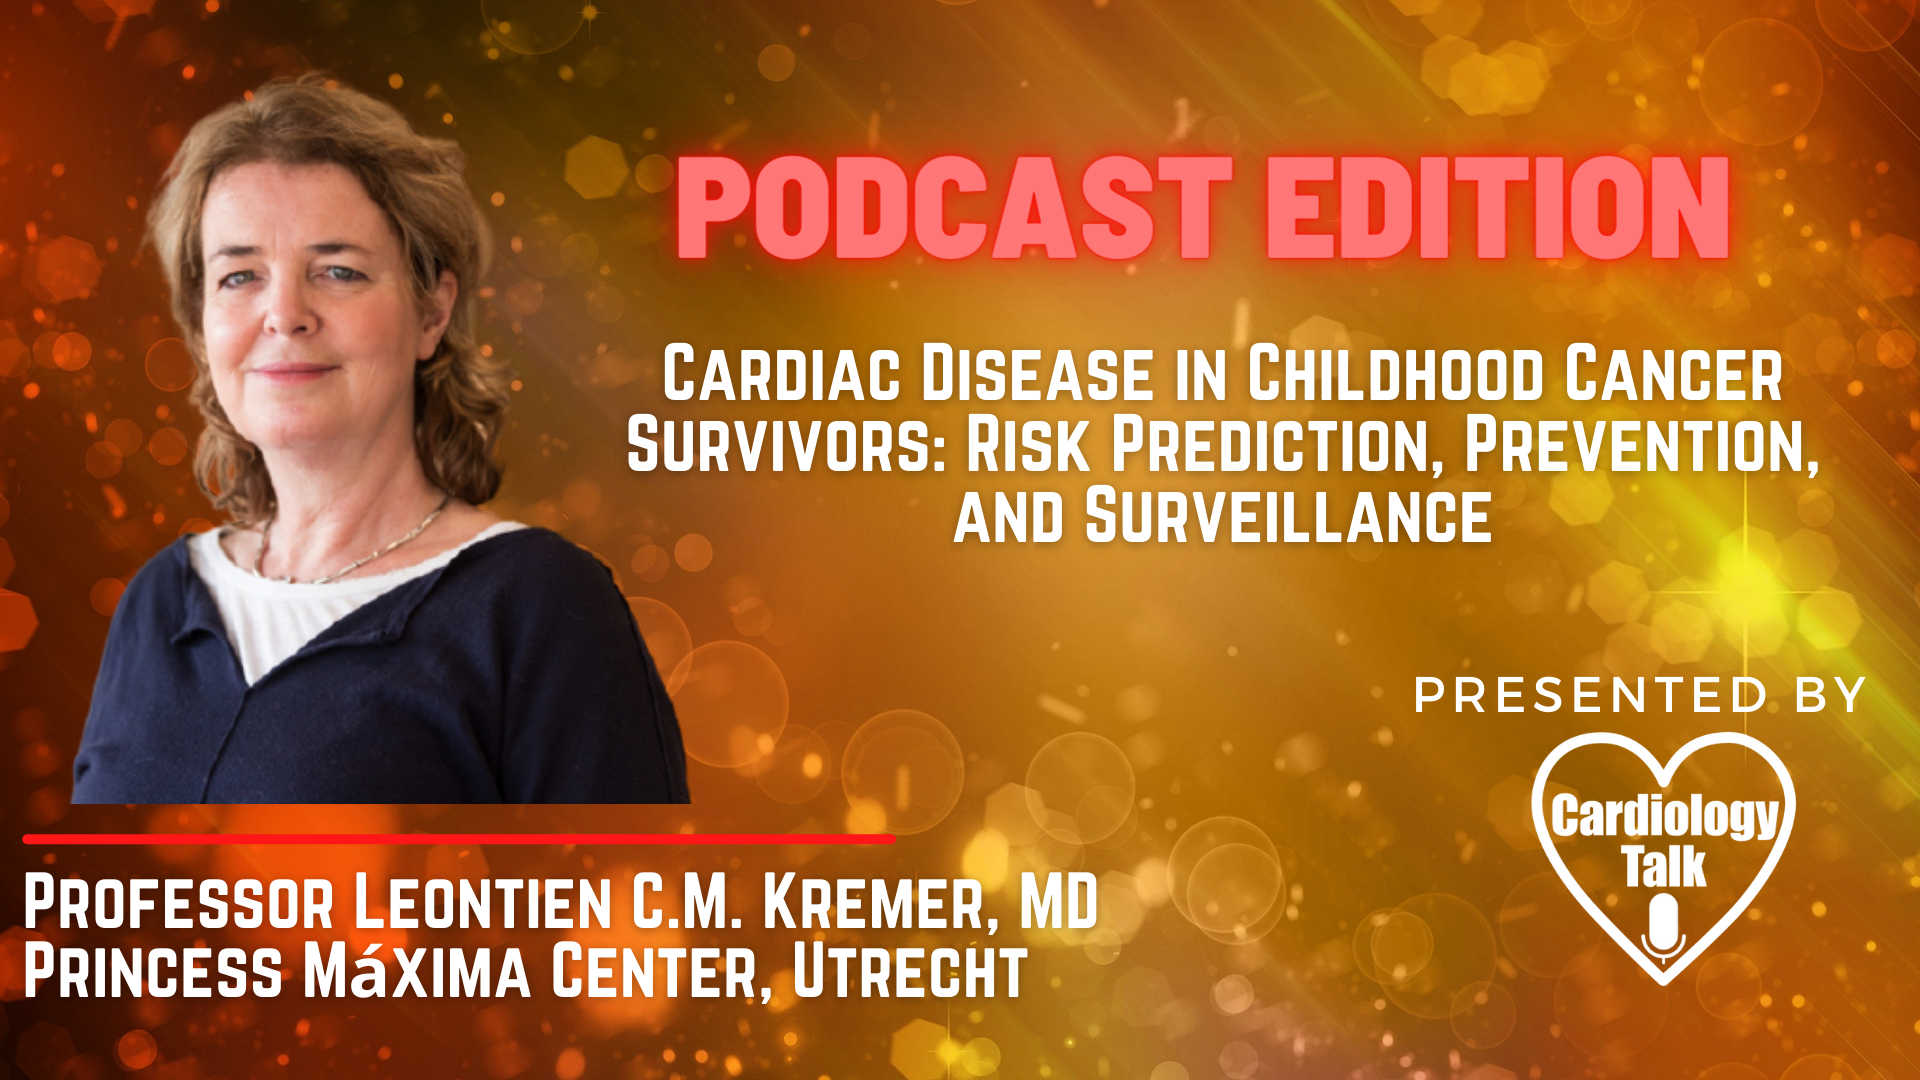 Podcast- Professor Leontien Kremer, MD - Cardiac Disease in Childhood Cancer Survivors: Risk Prediction, Prevention, and Surveillance: JACC CardioOncology State-of-the-Art Review